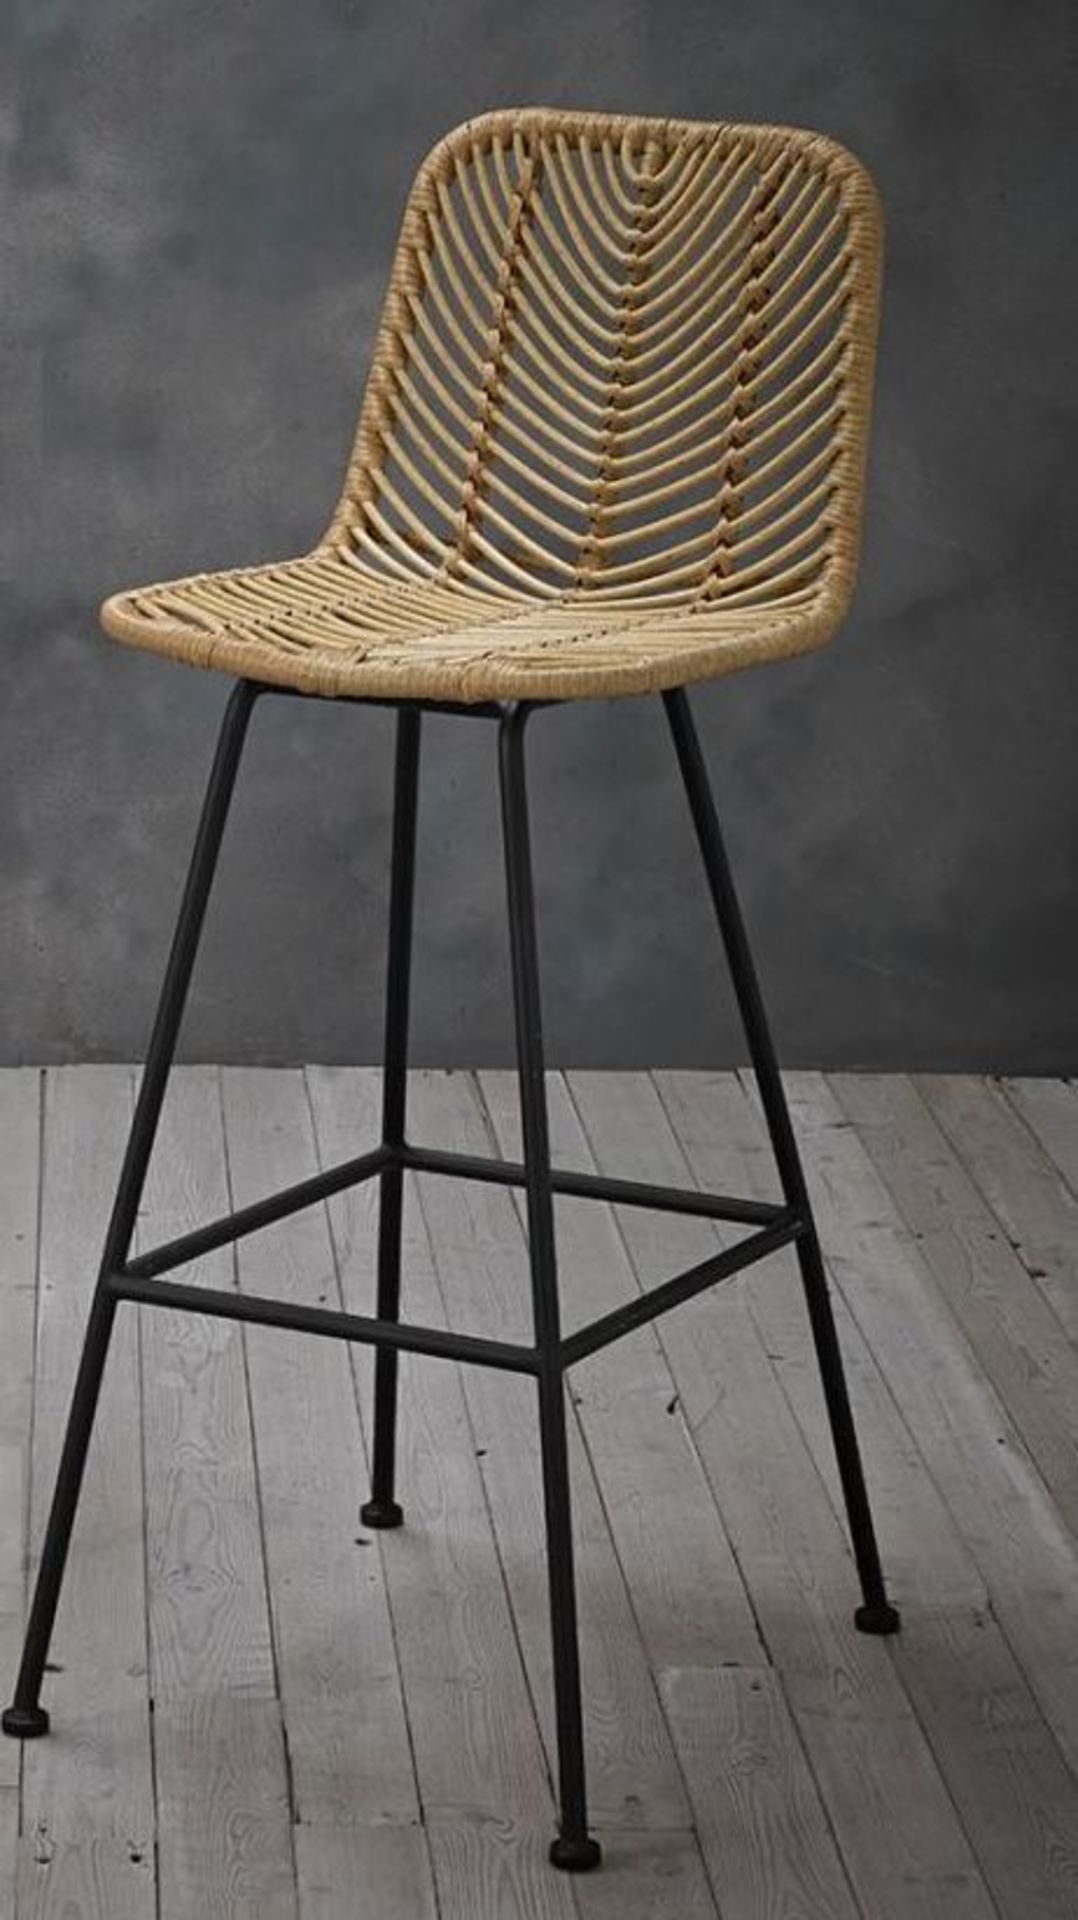 A1 PRODUCT NEW -   x2 (PAIR) OF RAFFERTY RETRO WOVEN RATTAN BAR STOOLS IN NATURA COLOUR WITH BLACK M - Image 2 of 3